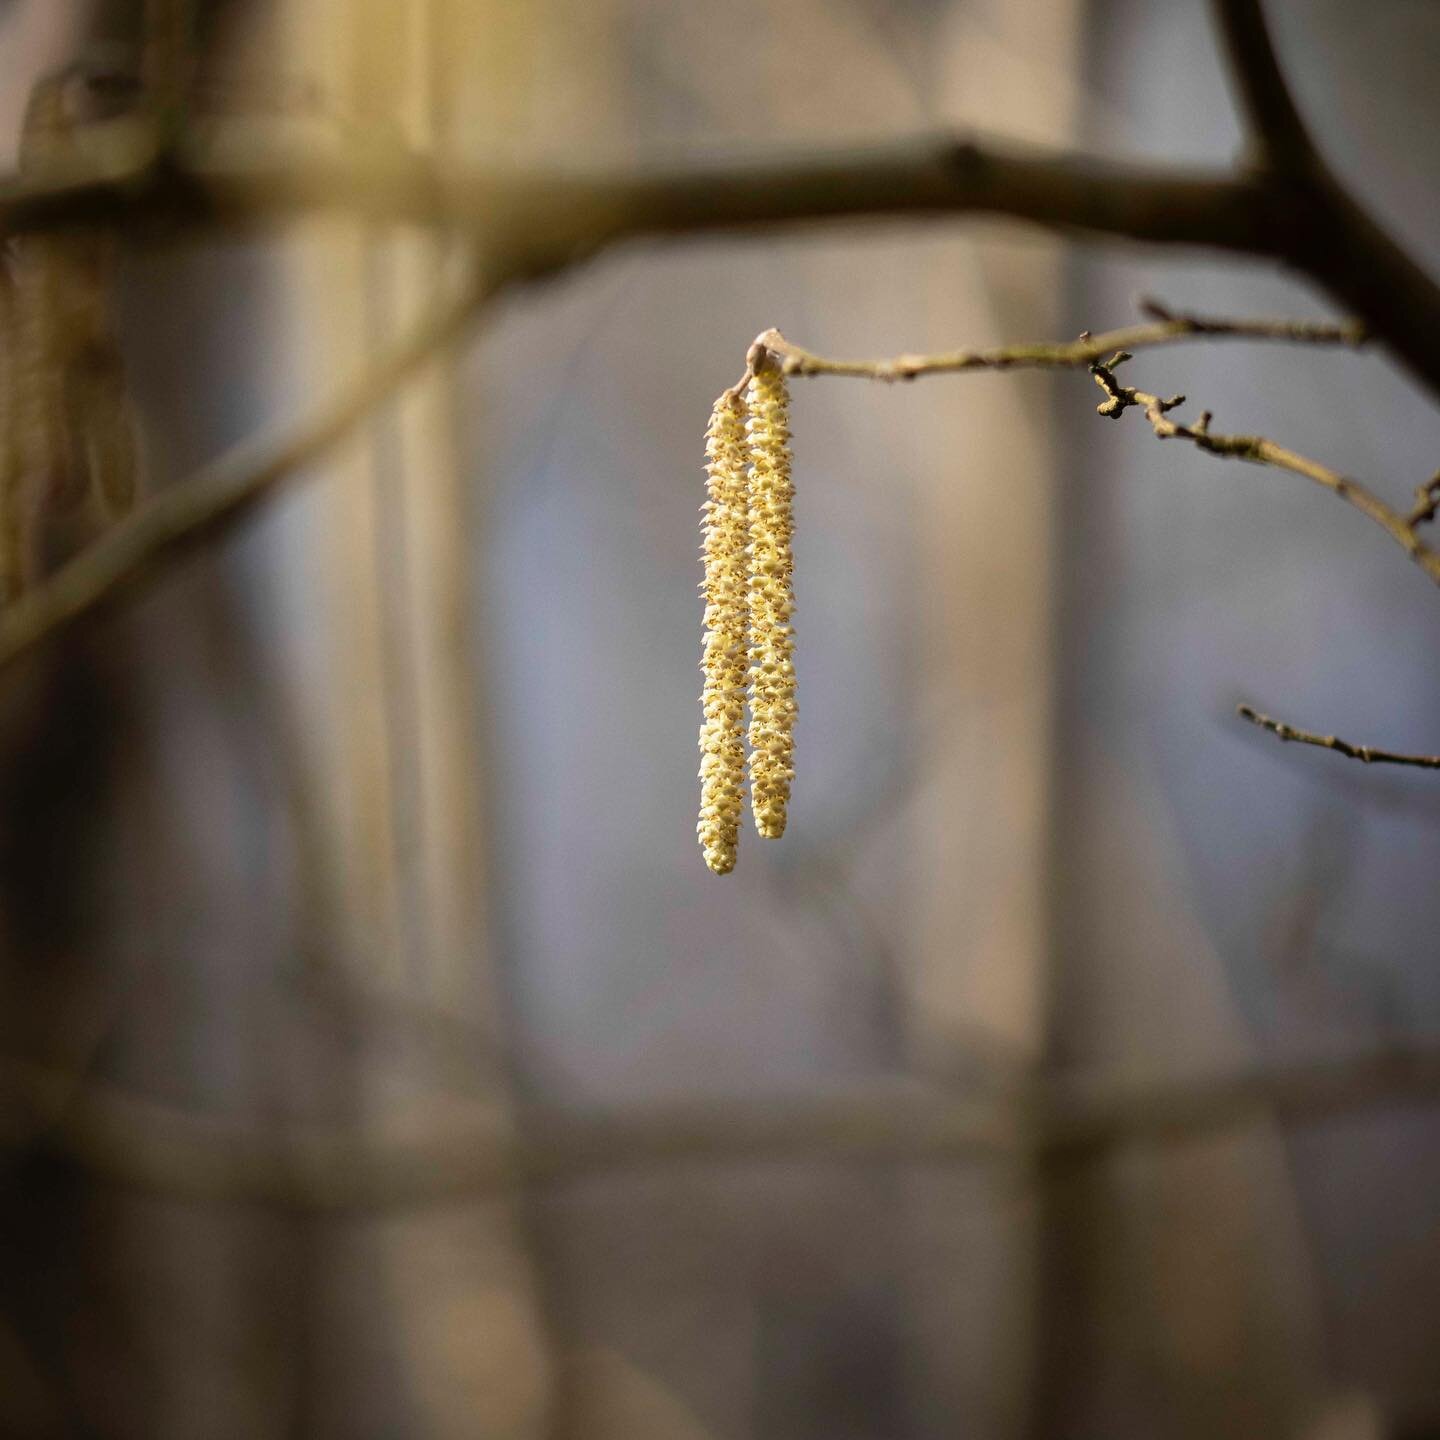 Like a pair or dangling earrings #hazeltree #male #catkins they are all around at the moment. The female flower will later produce  the #nuts.
&bull;
www.gavinshawcreative.com/gsc-print-shop
&bull;
#hazel #tree #catkins #country #walk #male #flower #